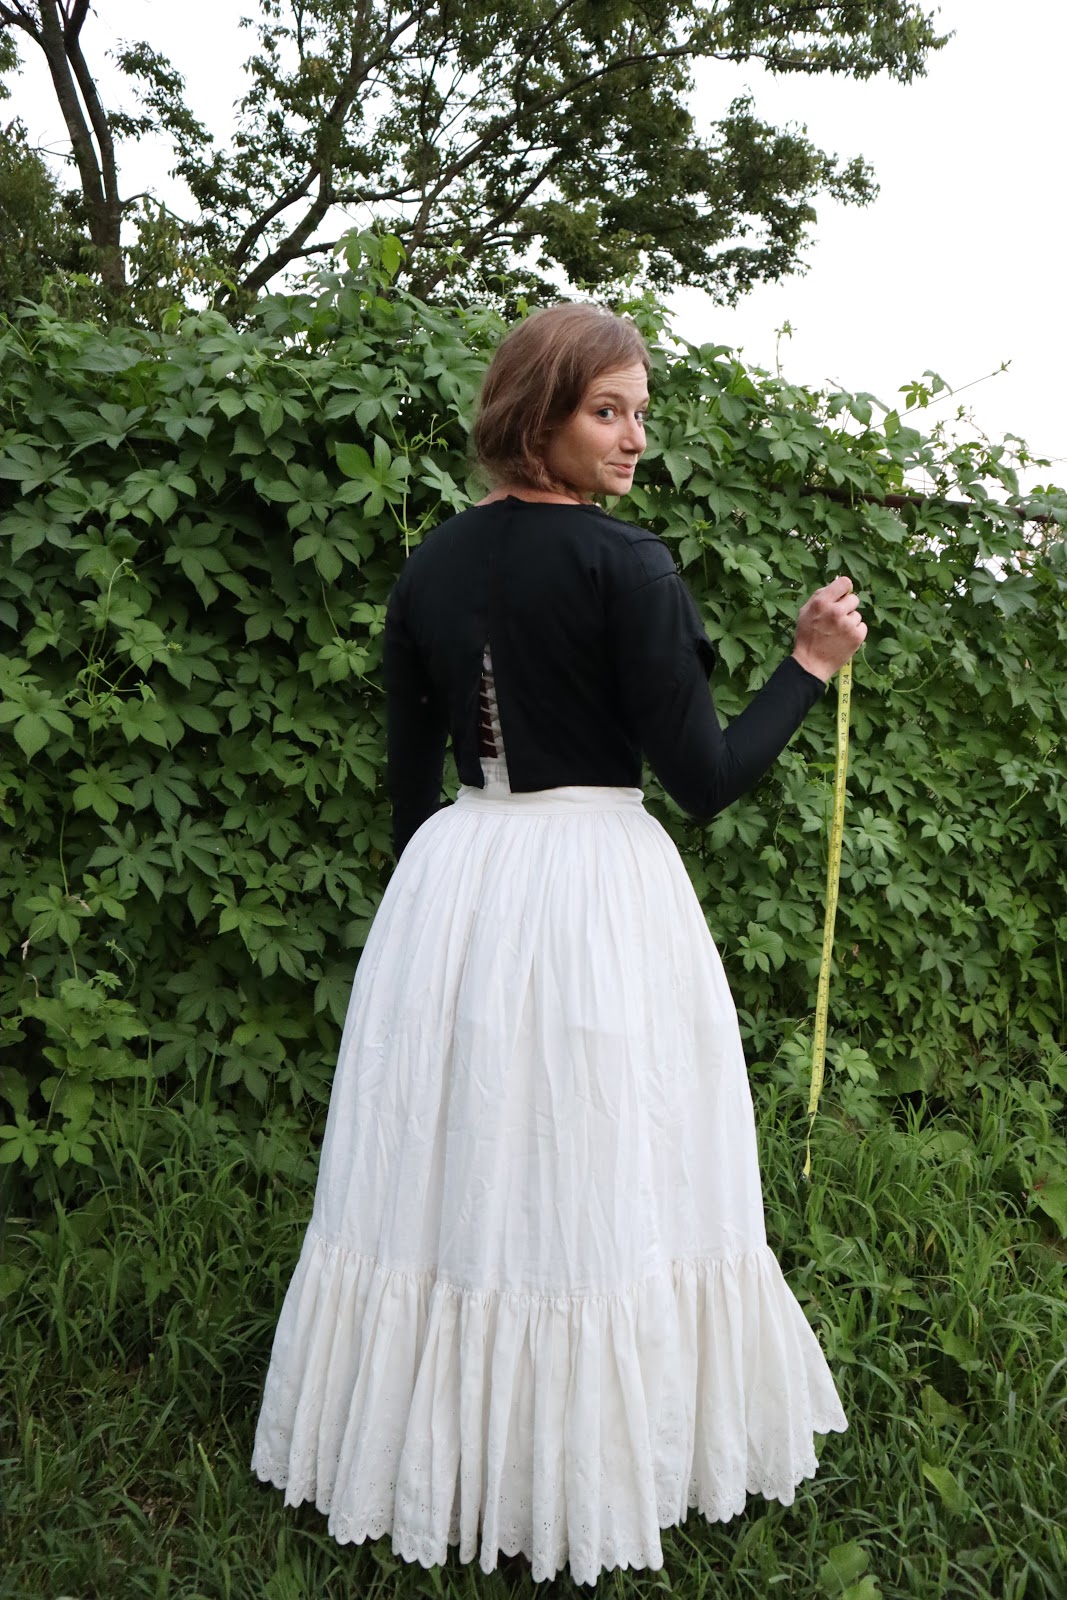 The Sewing Goatherd: Making a Black Wool 1840's Dress on an Airplane